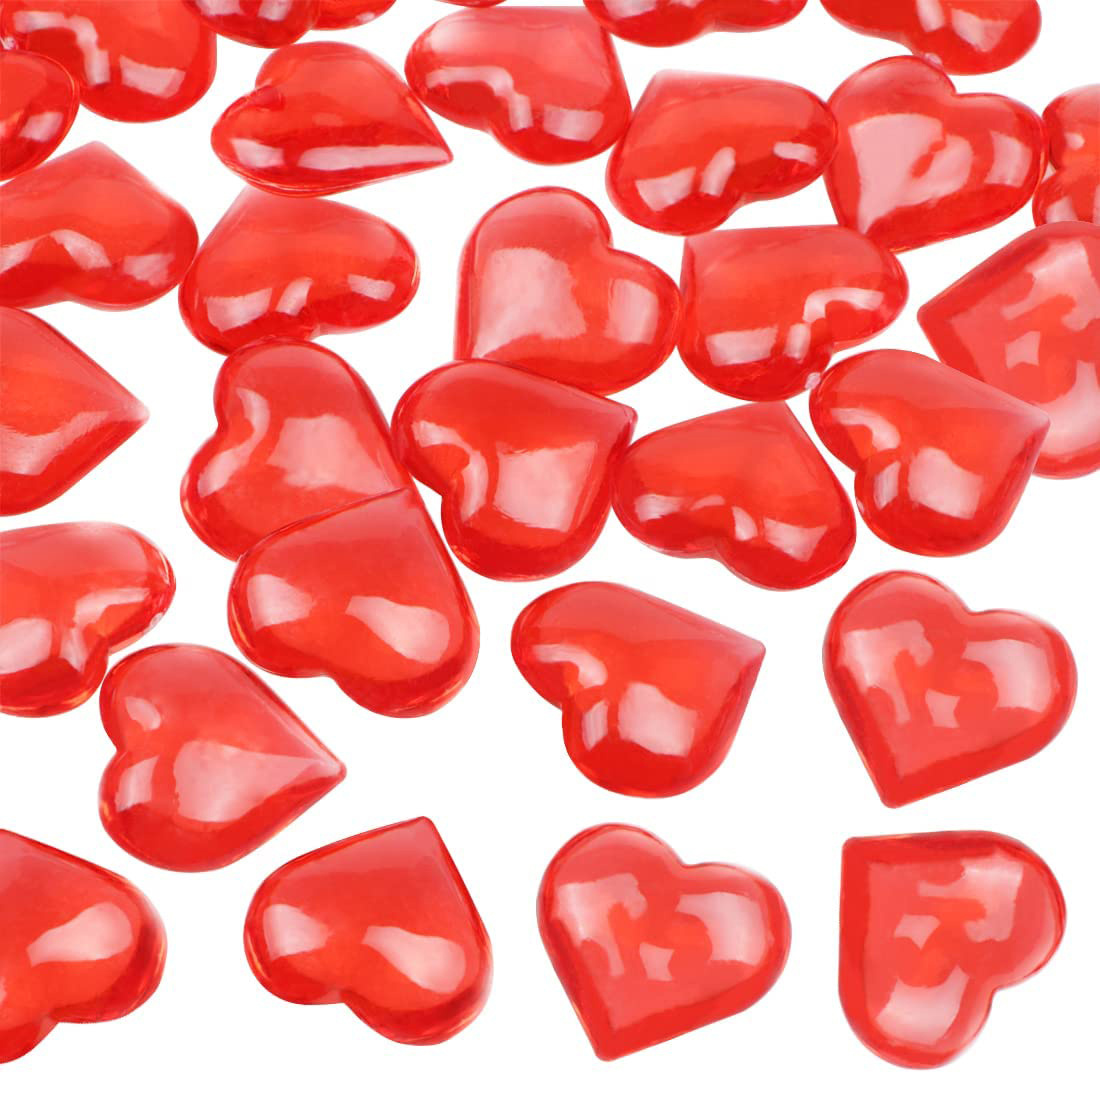 HUIANER Pink Acrylic Heart Gems 1lb Hearts Shaped Crystals Beads for Valentine's Day Decorations Vase Filler Table Scatter Engagement Wedding Home